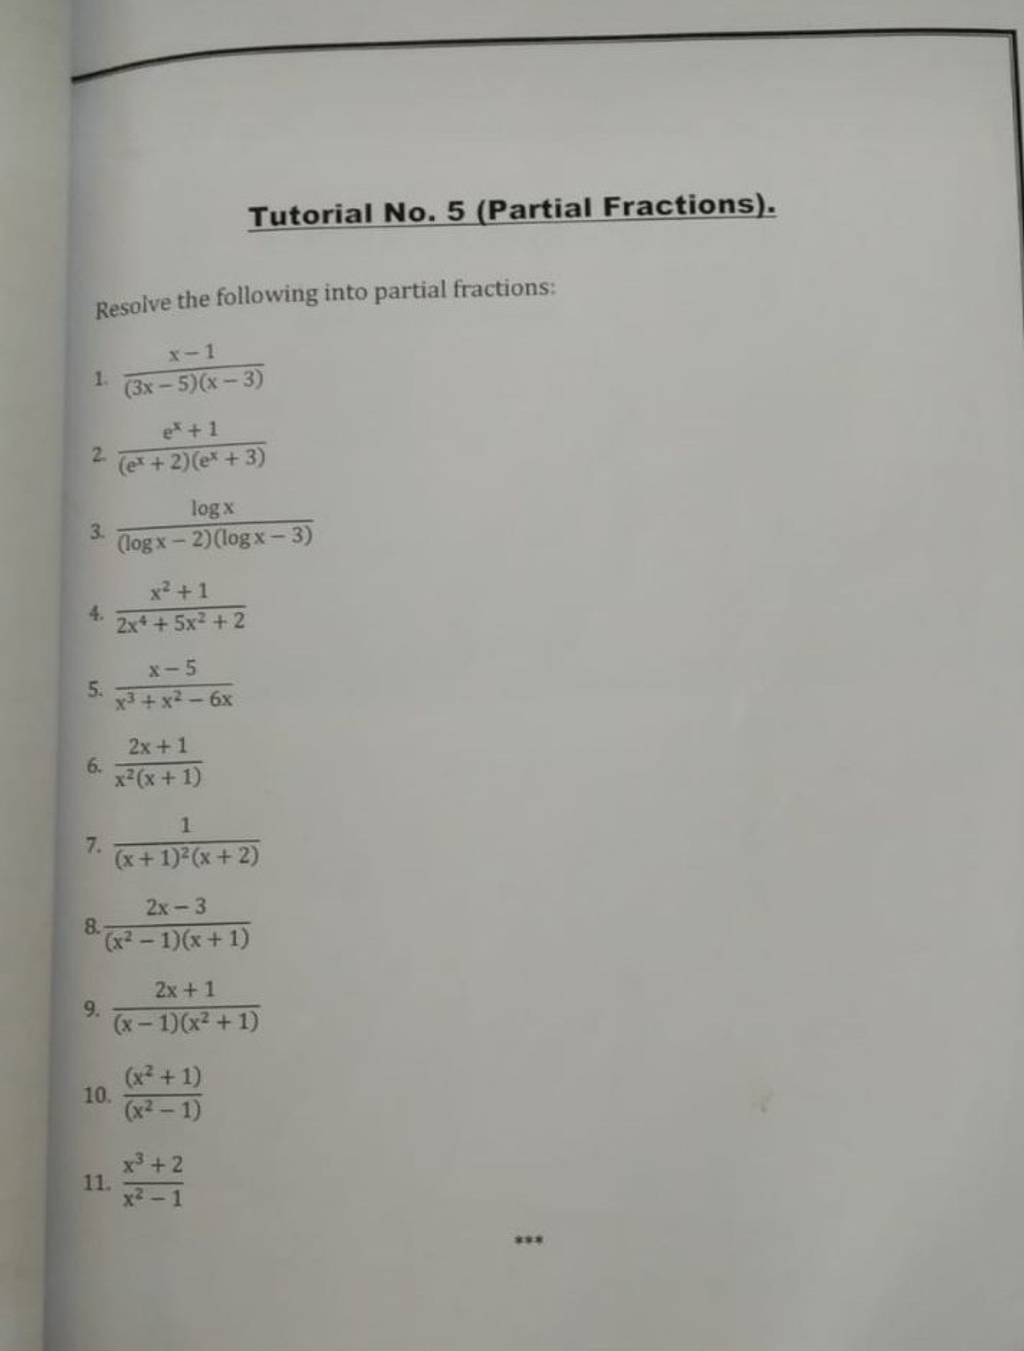 Tutorial No. 5 (Partial Fractions). Resolve the following into partial